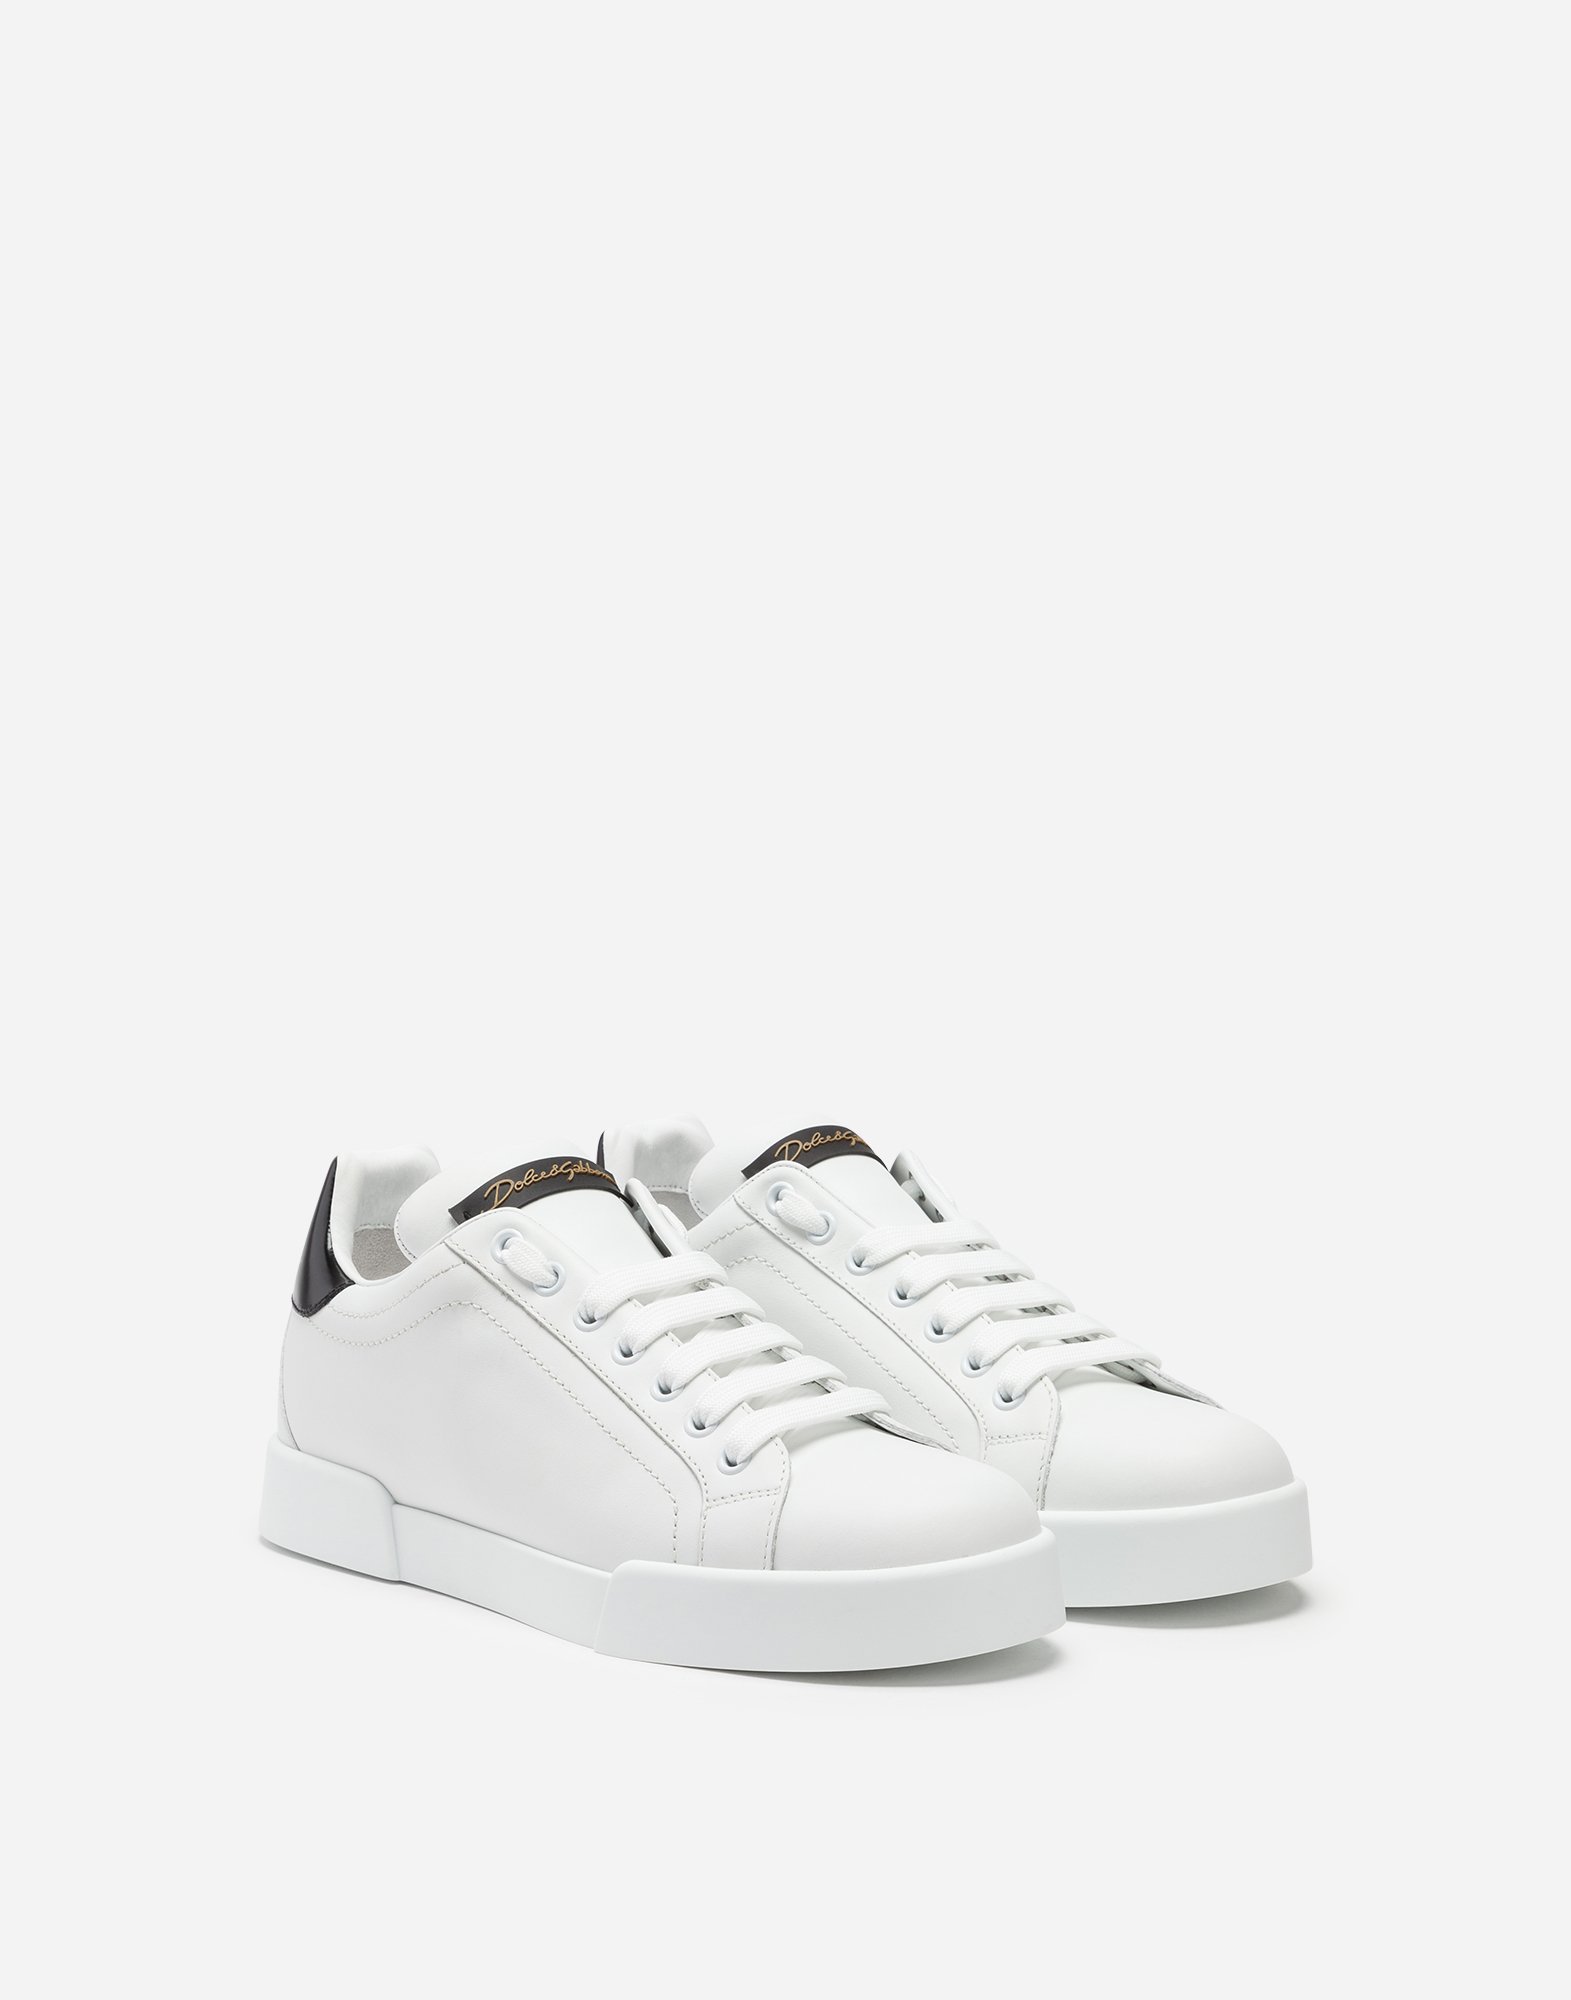 Dolce&Gabbana LEATHER SNEAKERS WHITE 2